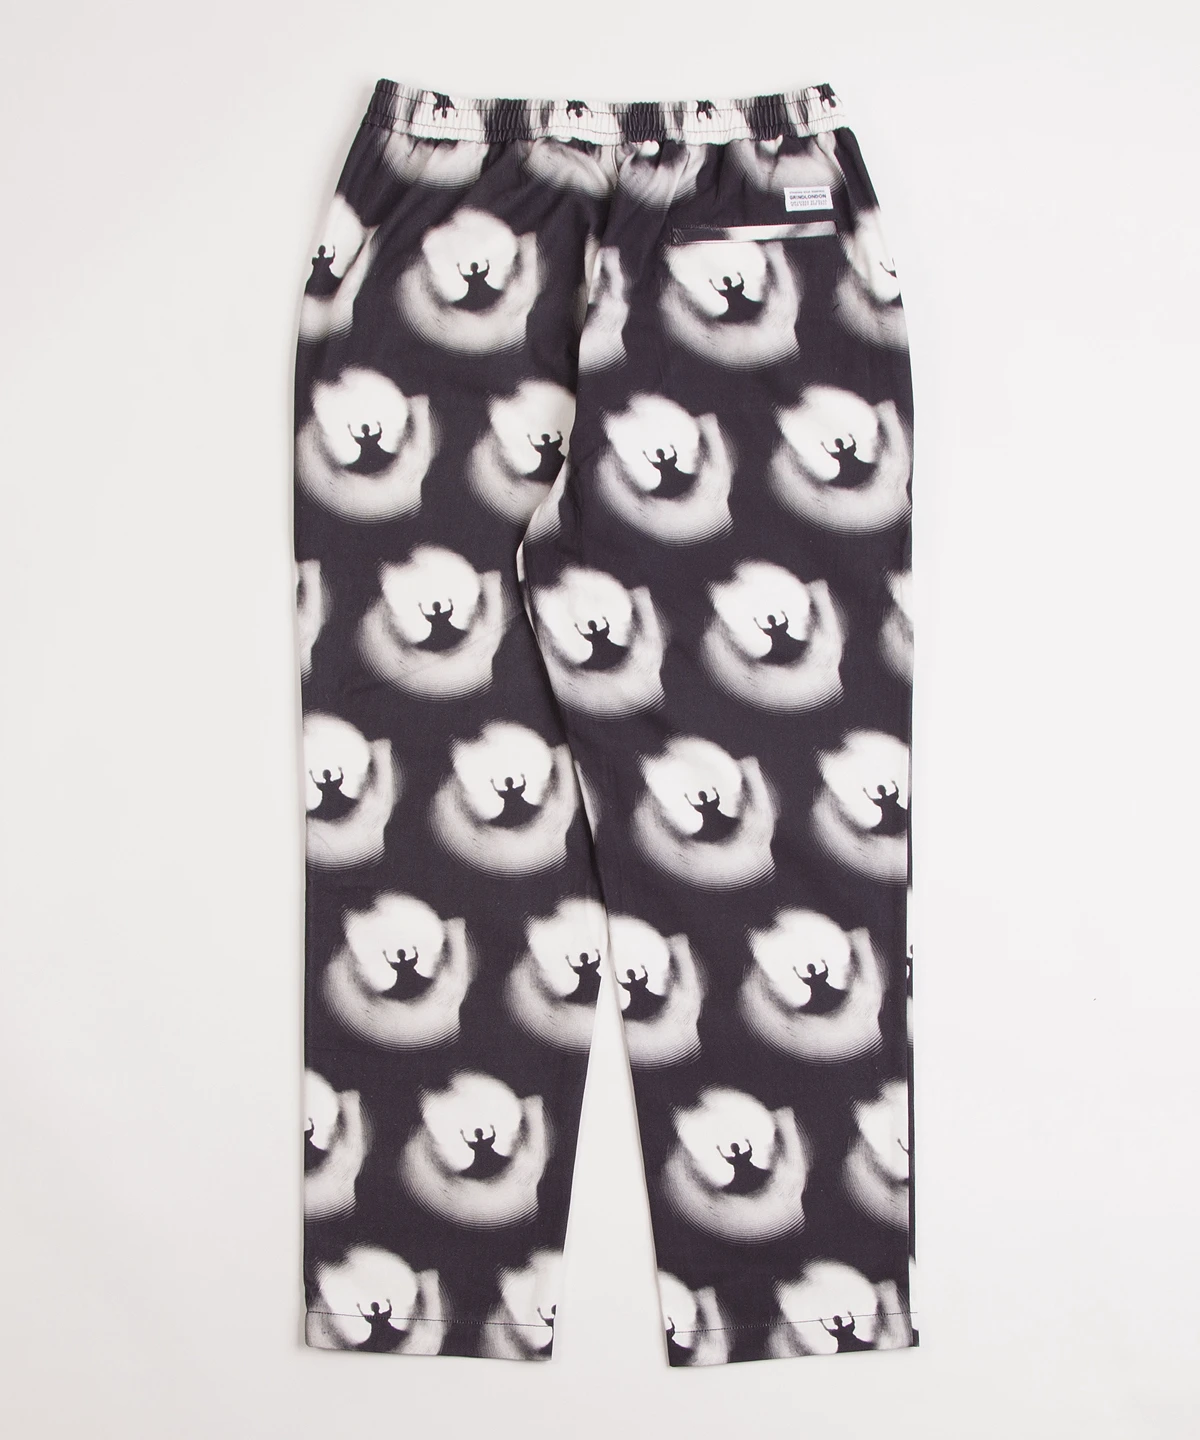 grindlondon another dimension cotton printed trouser